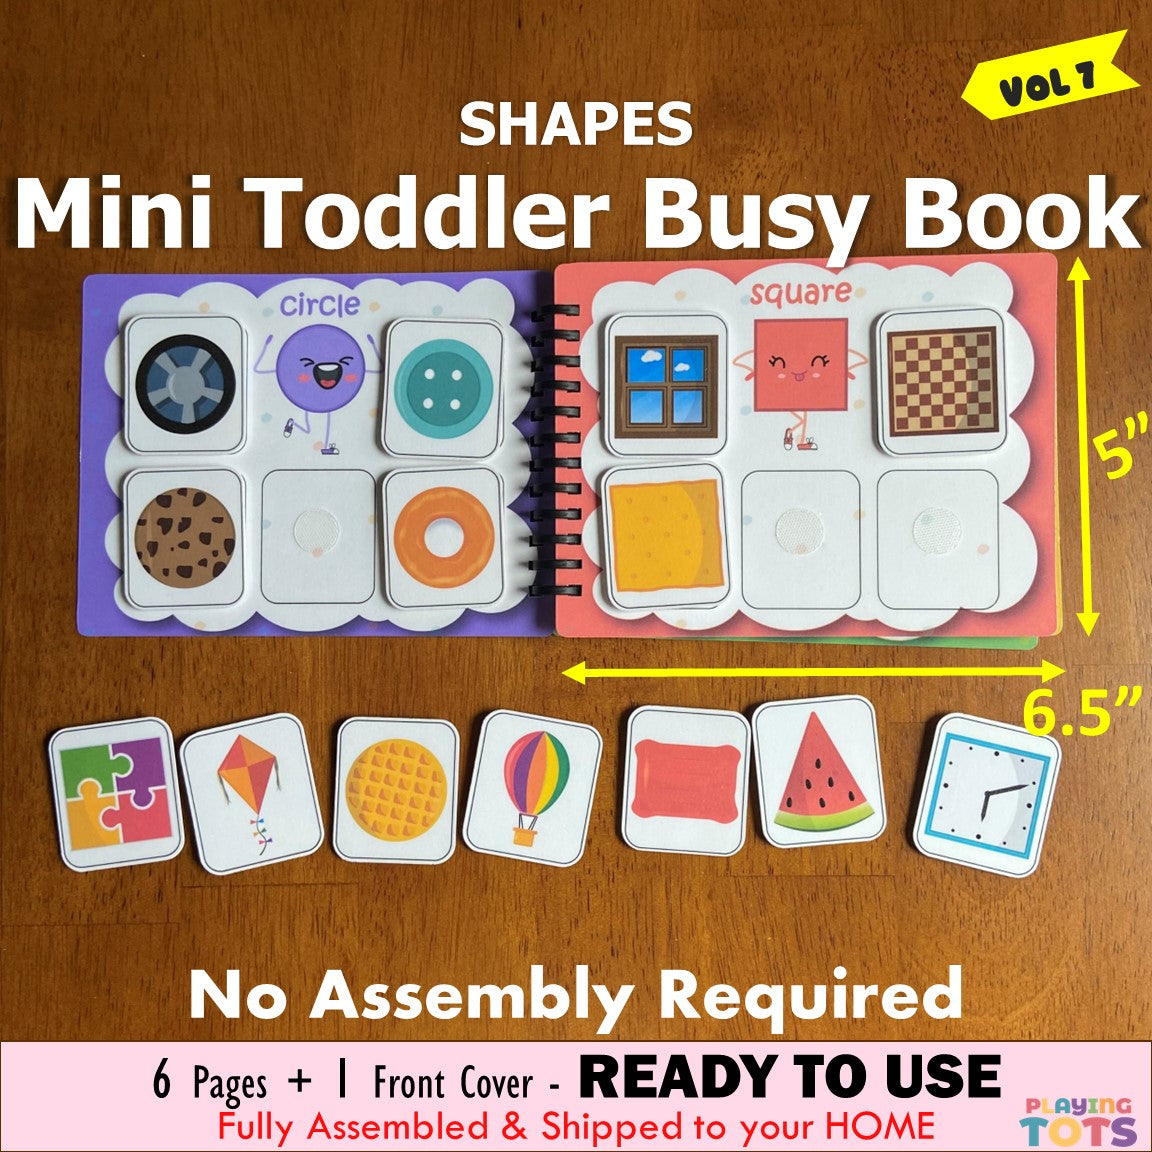 Toddler Mini Busy Book VOL7, Learning Binder, Quiet Book, Shapes Sorting